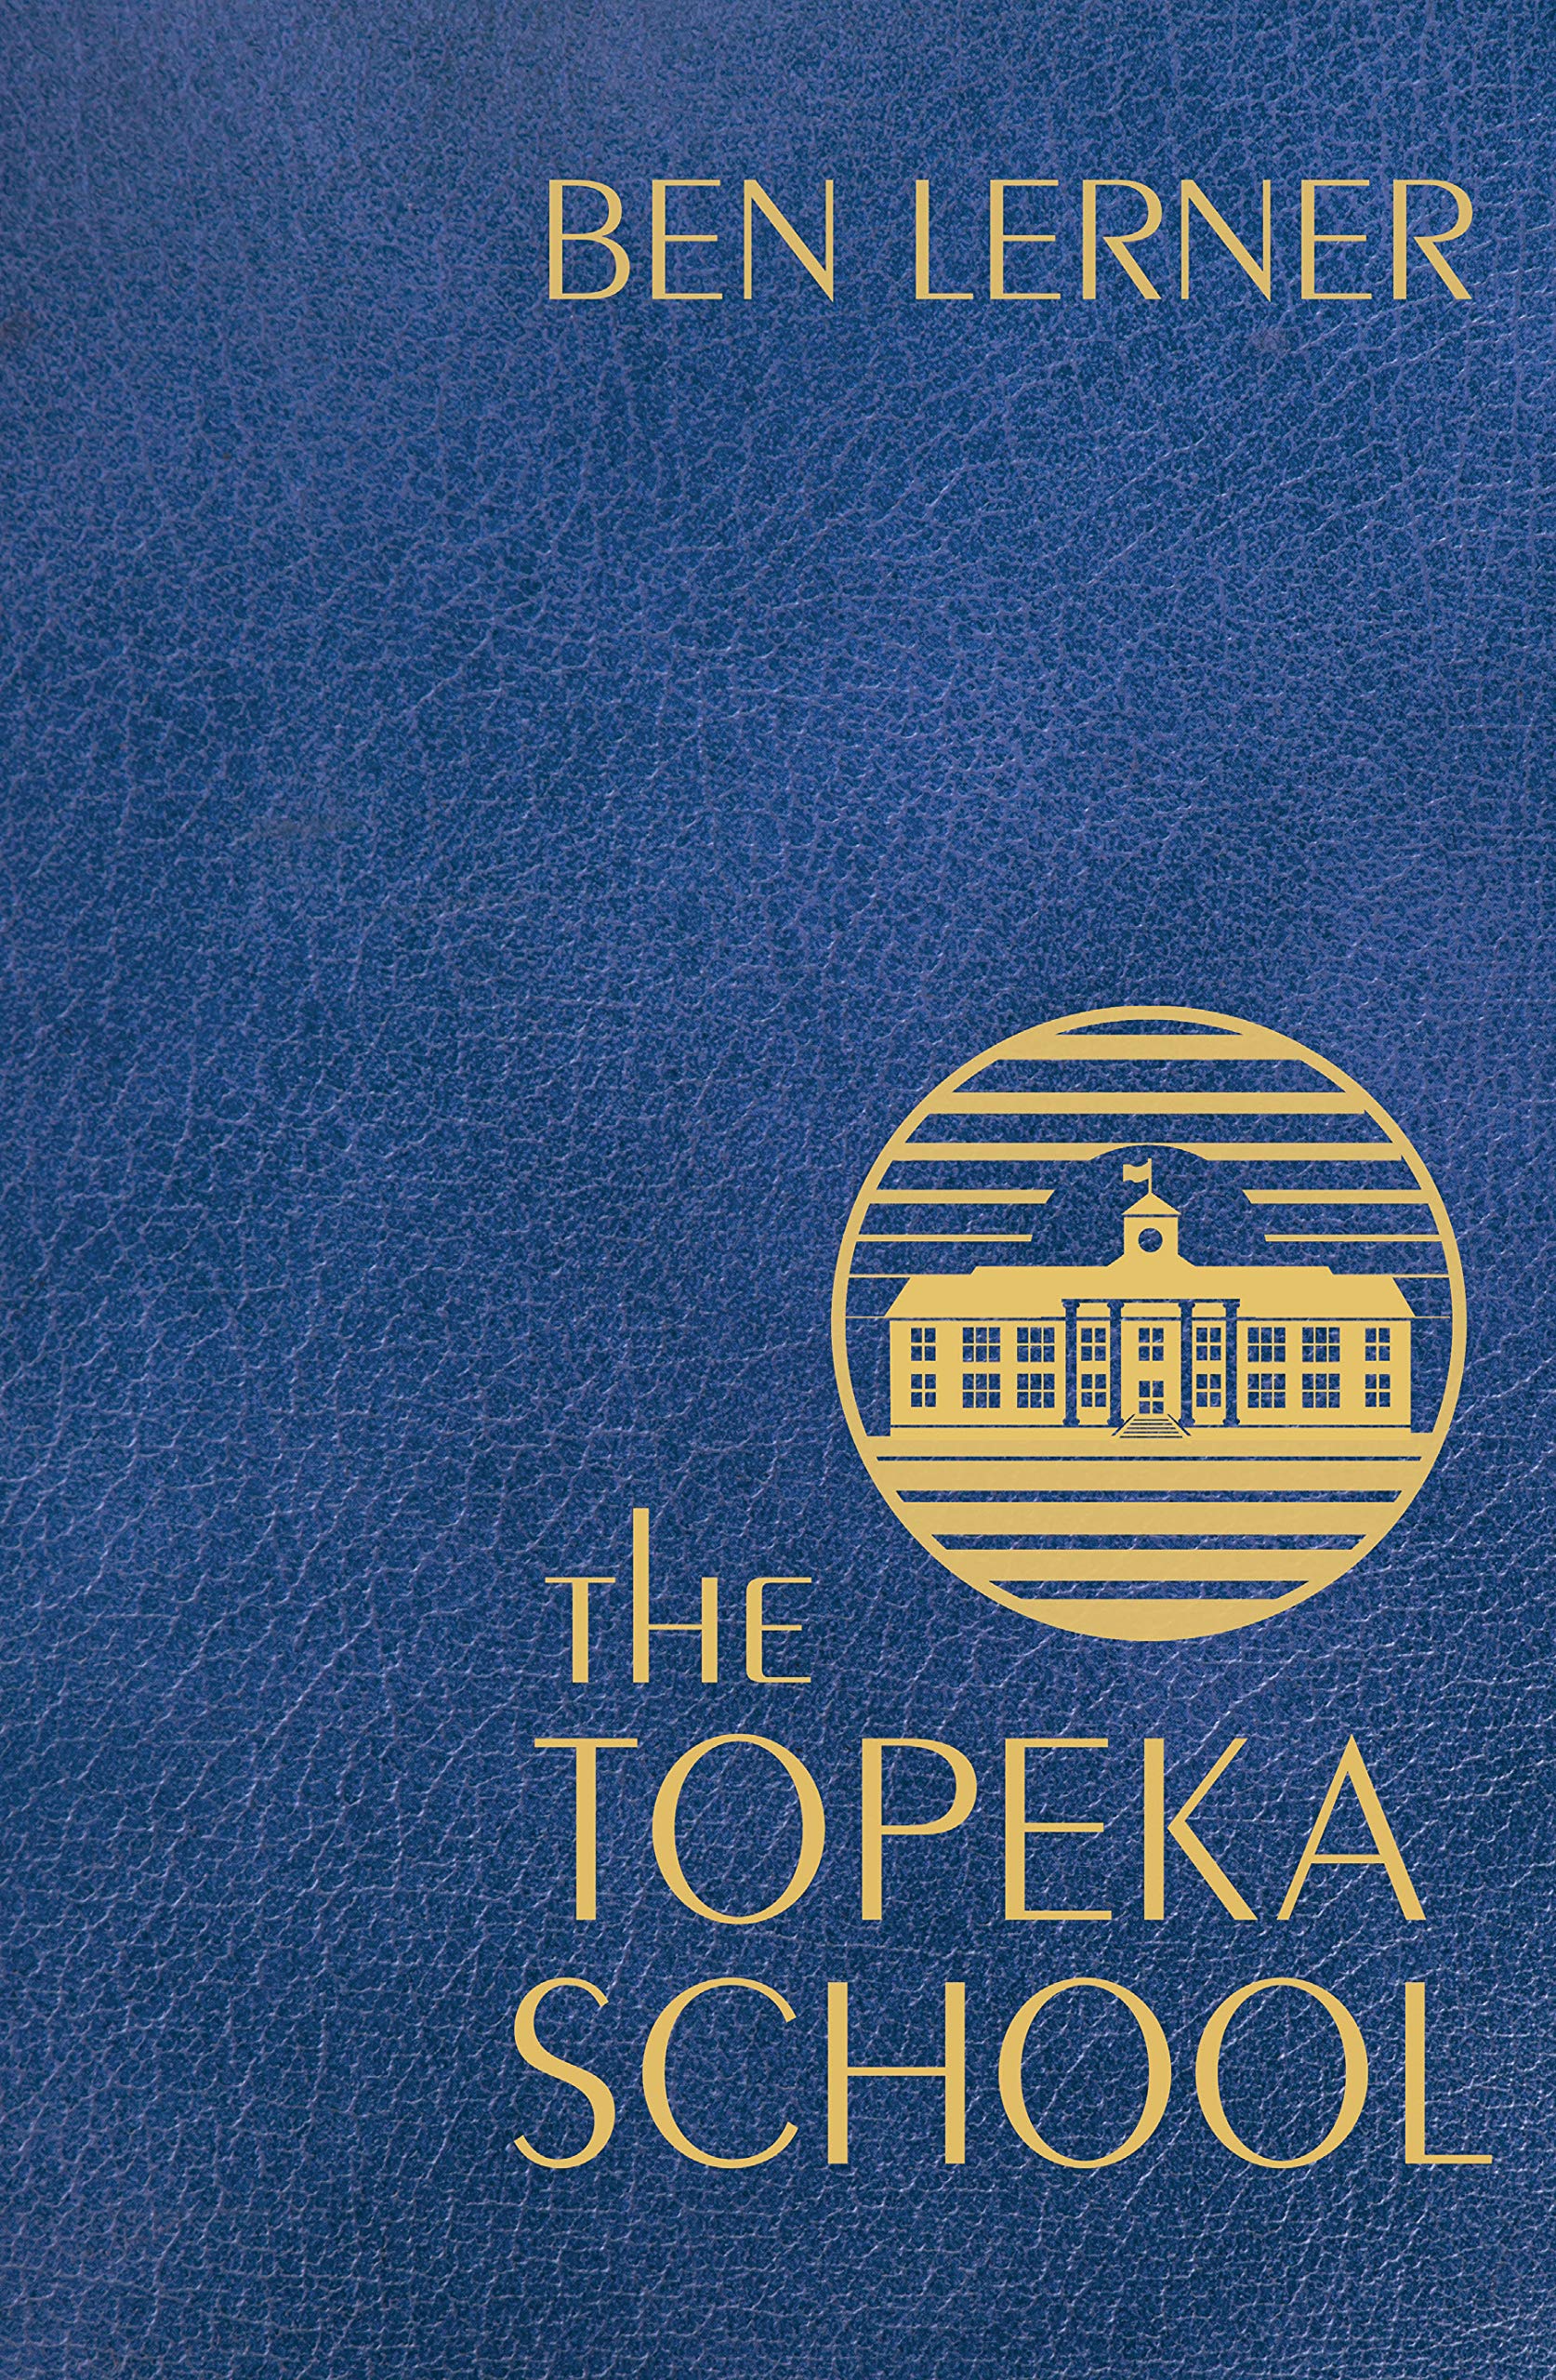 The Topeka School Fiction Book by Ben Lerner